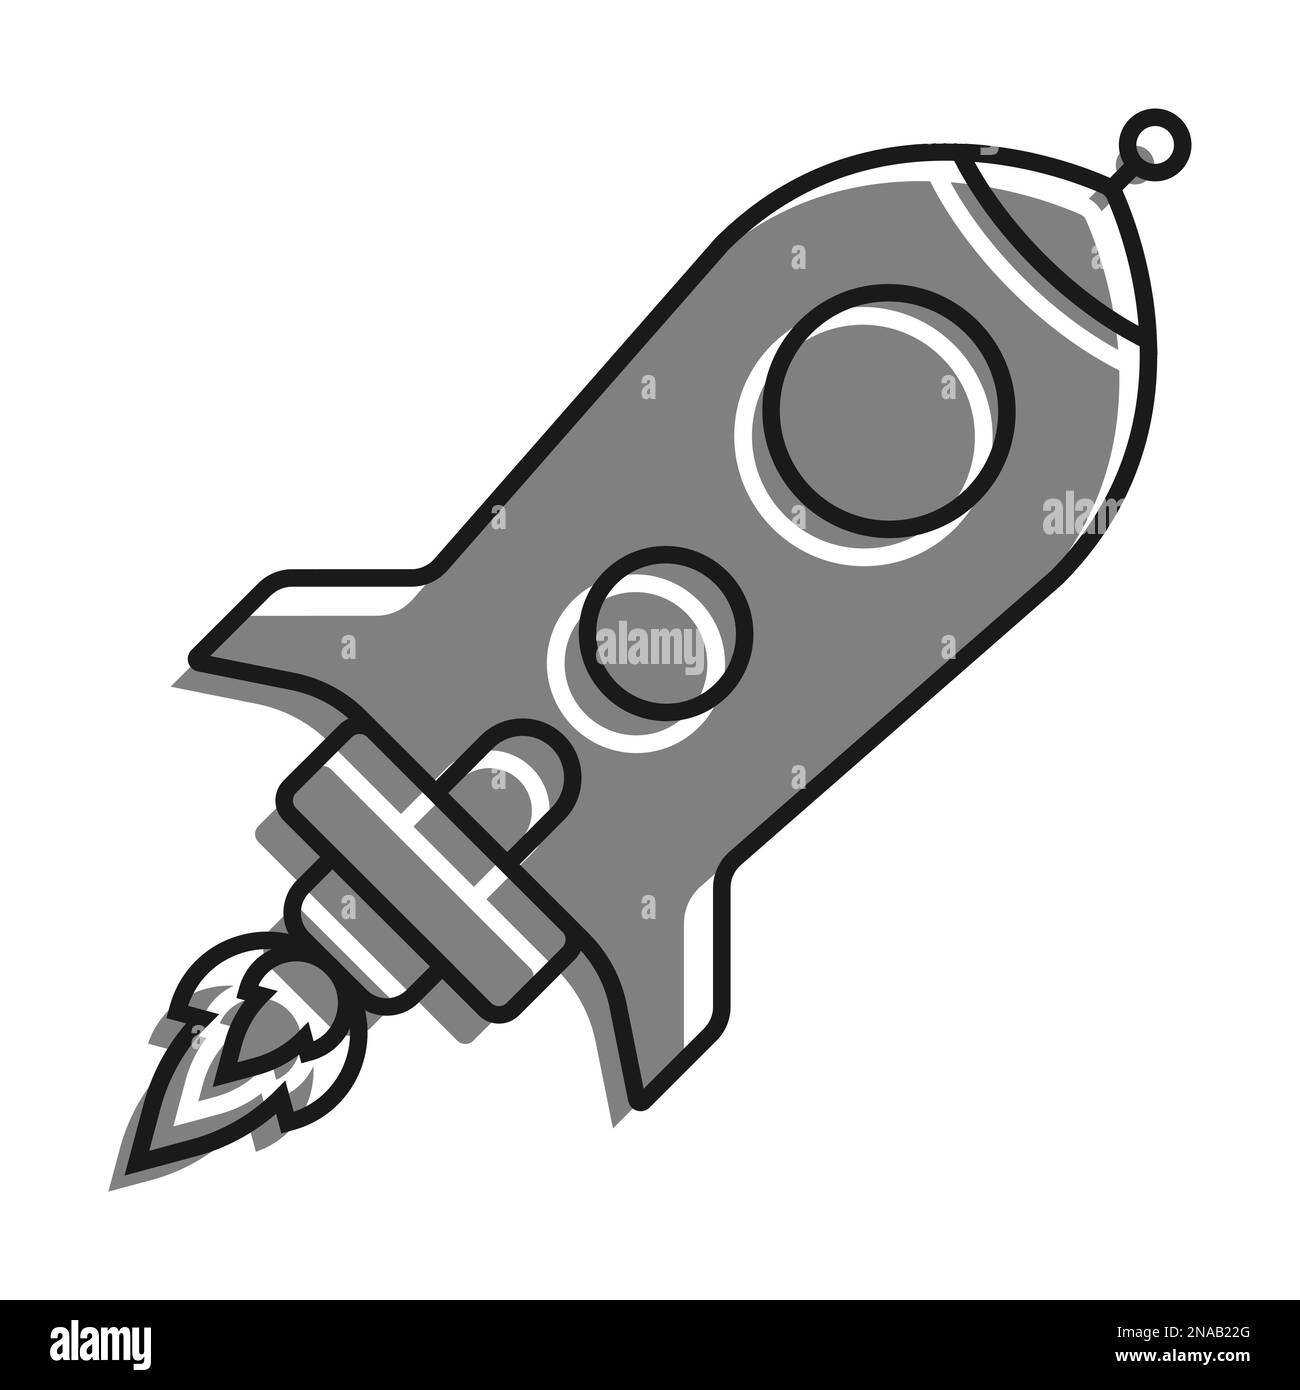 Flying Space Rocket filled with gray color icon. Flights To Mars, Moon And Planets Of Solar System. Technologies For Space Exploration. Simple black a Stock Vector